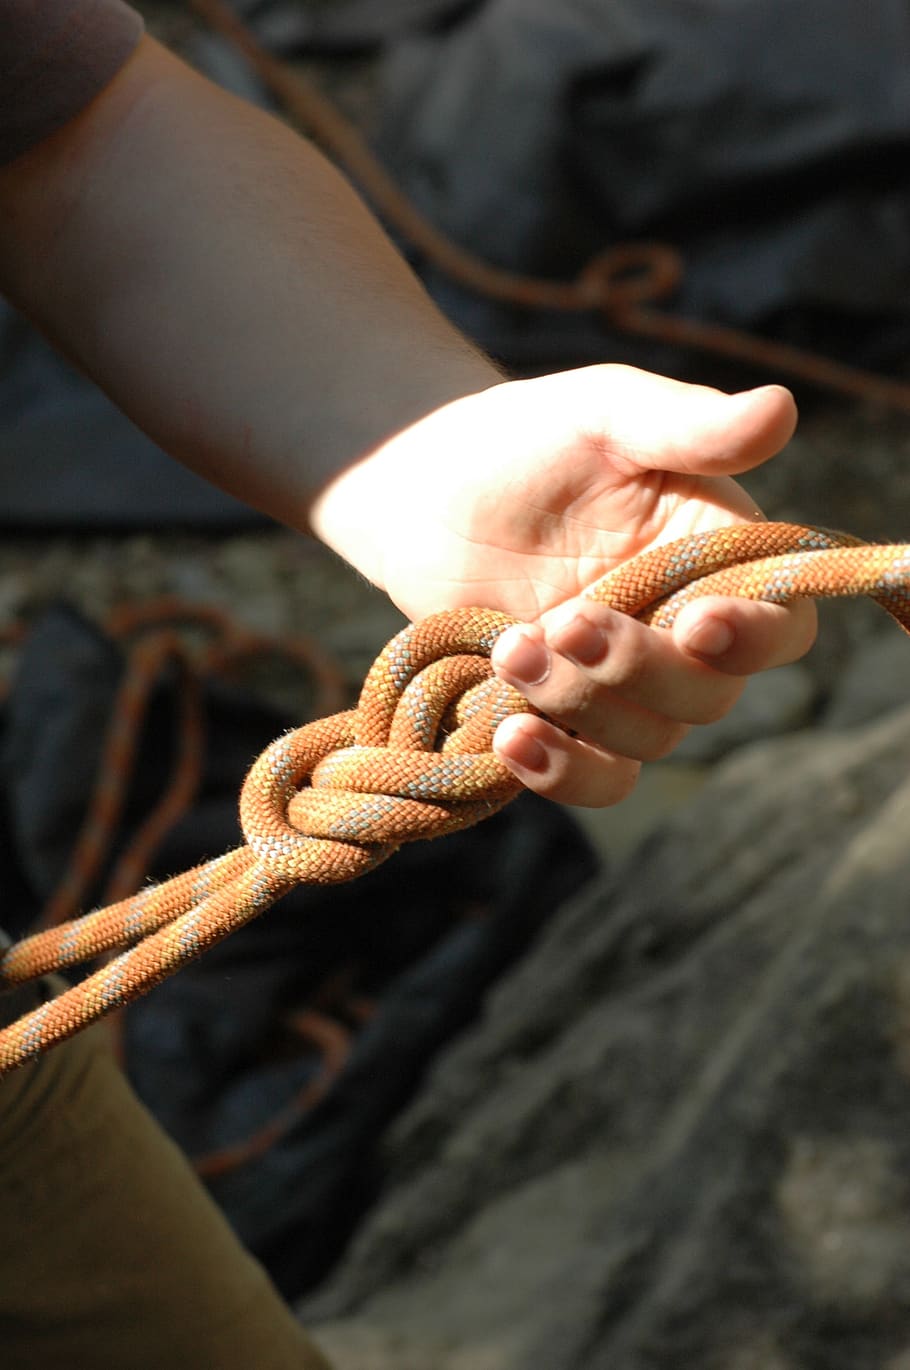 climb, knot, hand, partner check, eighth node, mountaineering, security, secure, rope, human hand